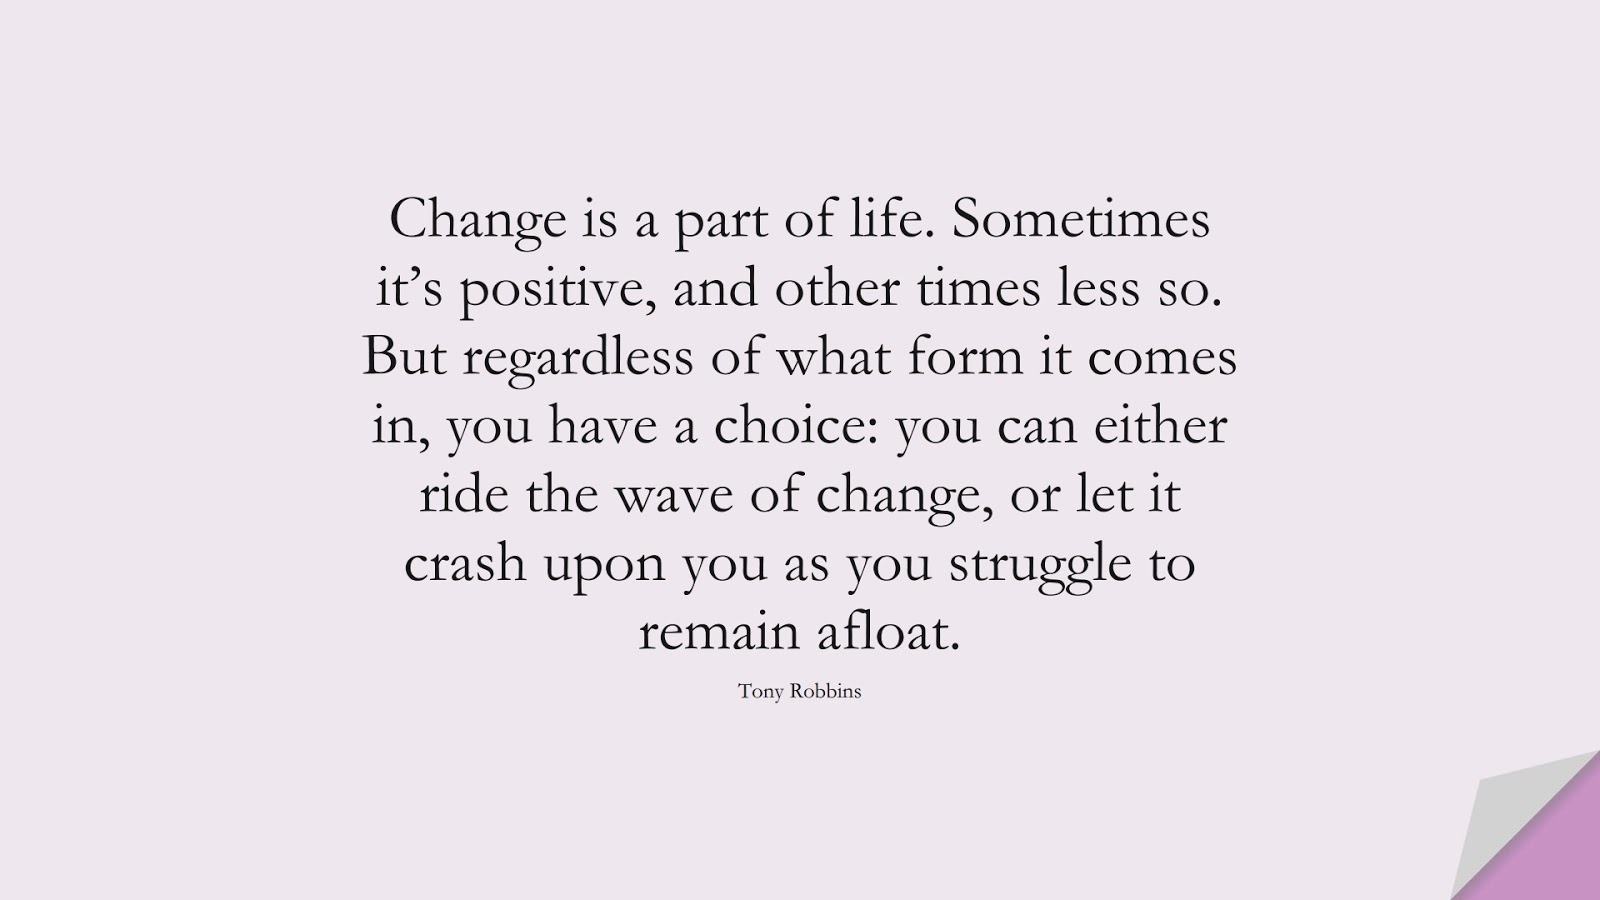 Change is a part of life. Sometimes it’s positive, and other times less so. But regardless of what form it comes in, you have a choice: you can either ride the wave of change, or let it crash upon you as you struggle to remain afloat. (Tony Robbins);  #PositiveQuotes